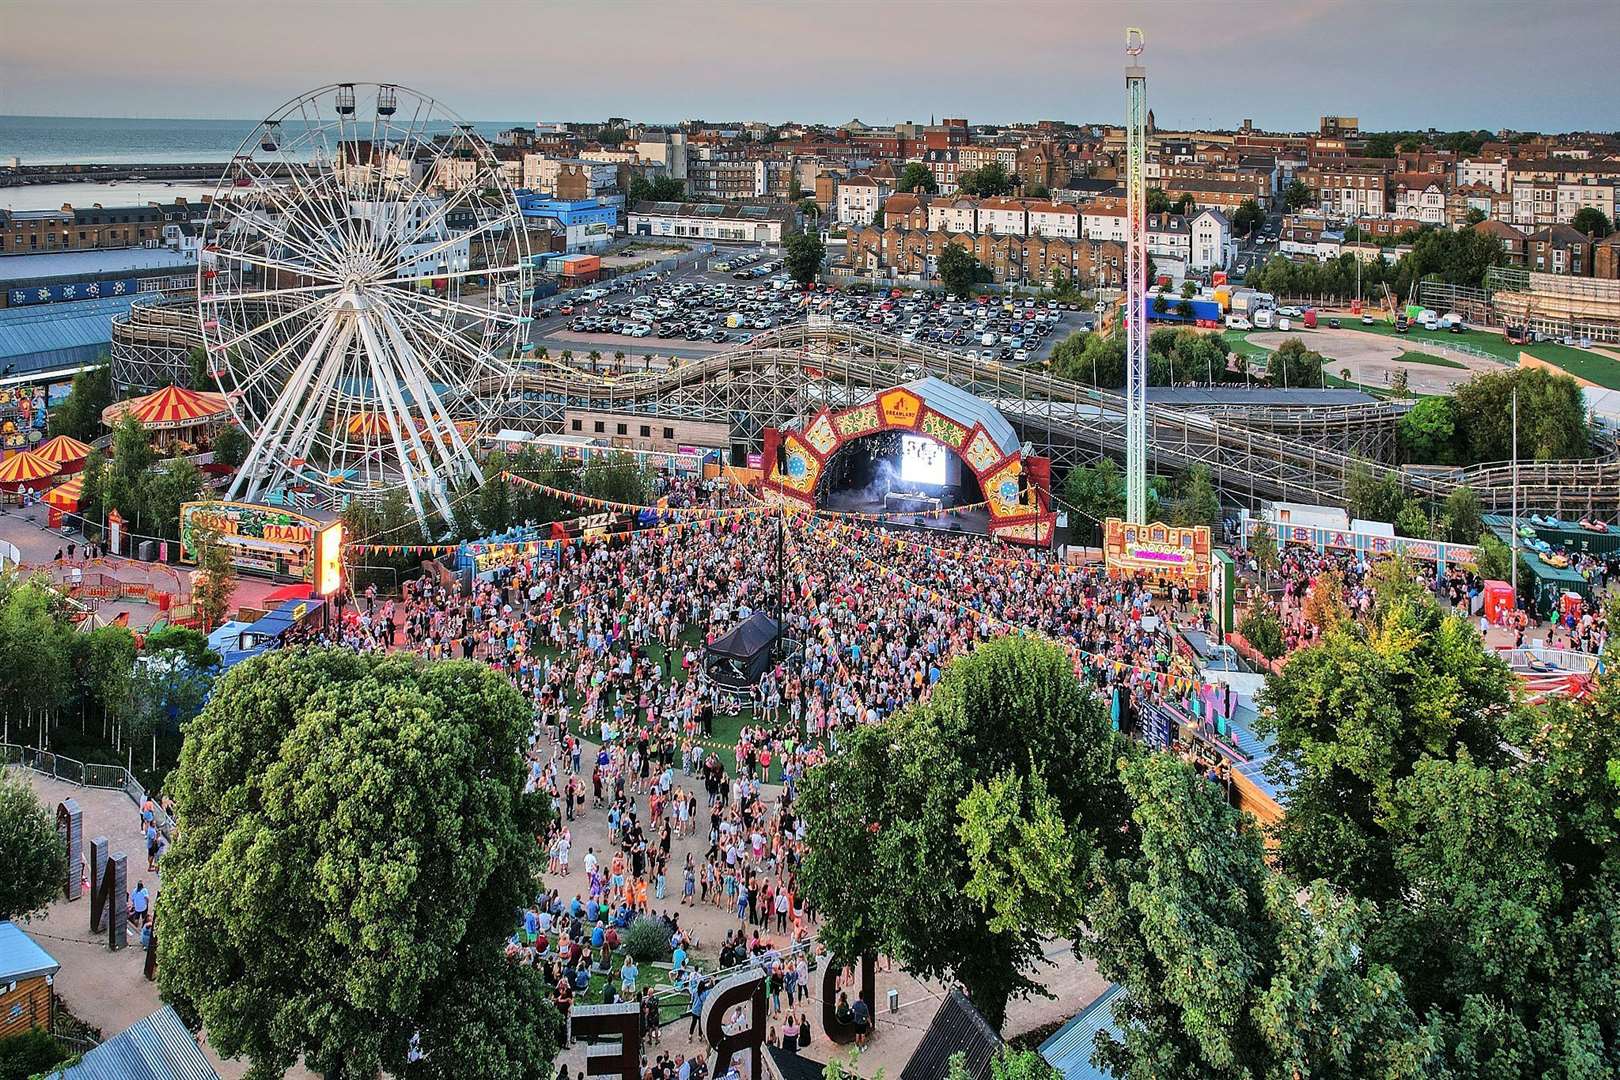 A young woman was reportedly spiked with a needle at Dreamland in Margate